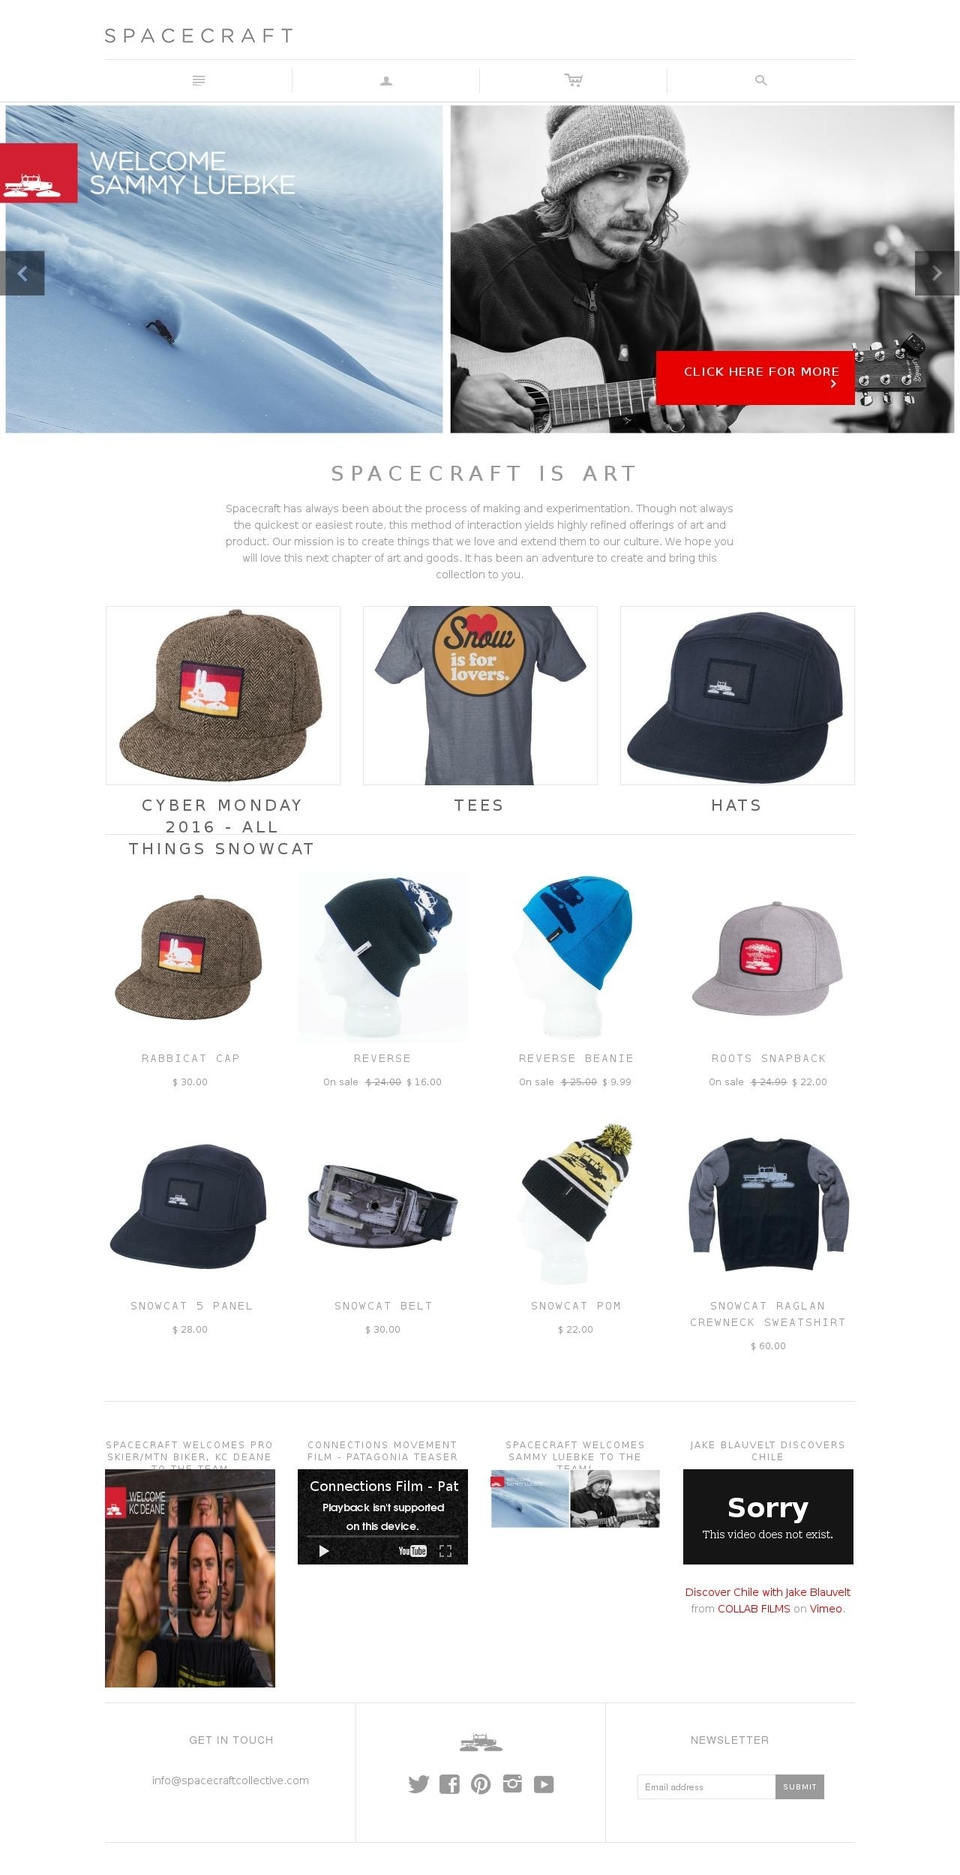 Portland Shopify theme site example spacecraftcollective.com